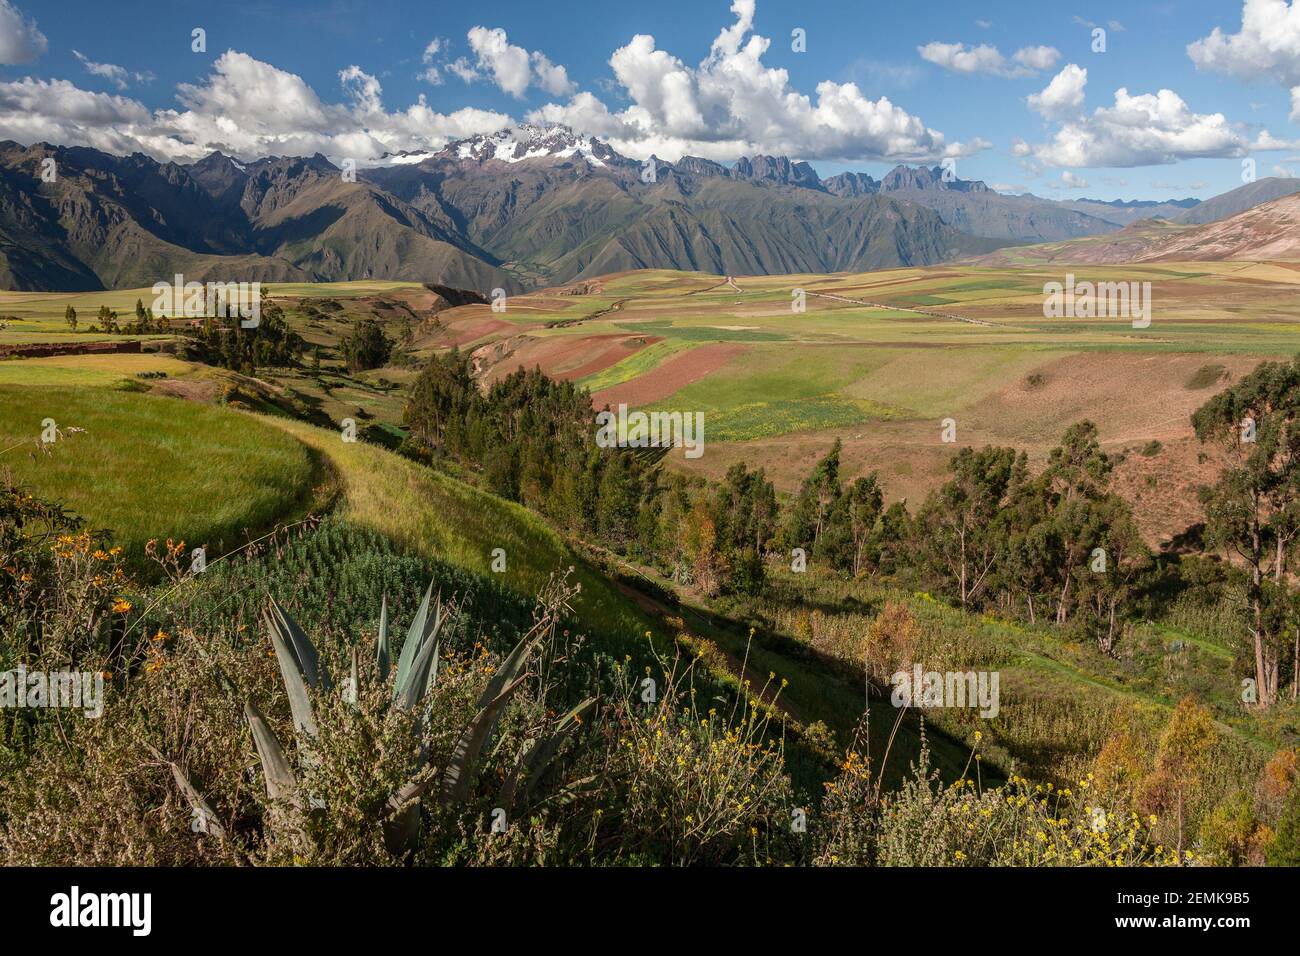 The Andes Mountain Range and farmland in the Urubamba Province of Peru, South America. Stock Photo